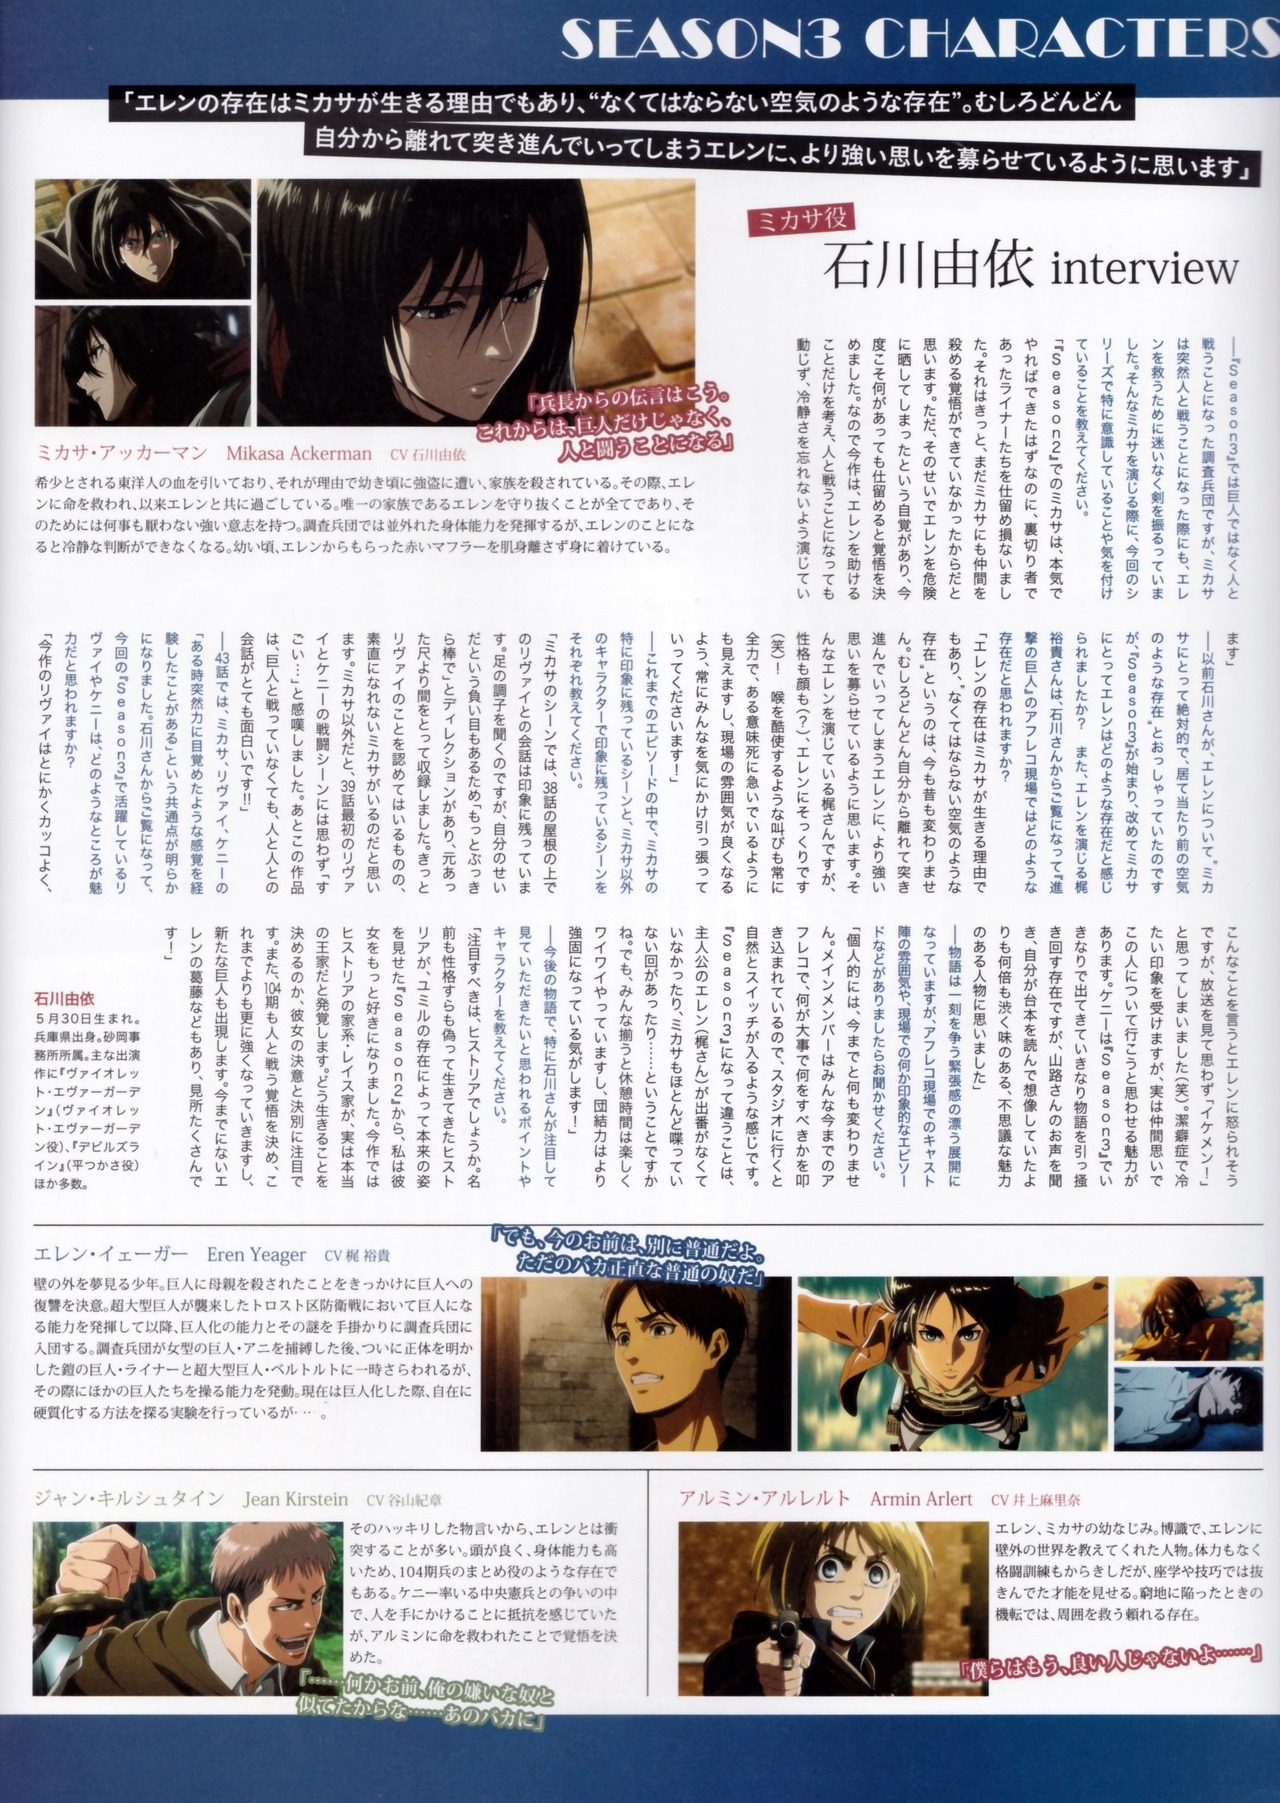 snknews: tdkr-cs91939: Vol.41 of spoon.2Di features another Levi illustration and